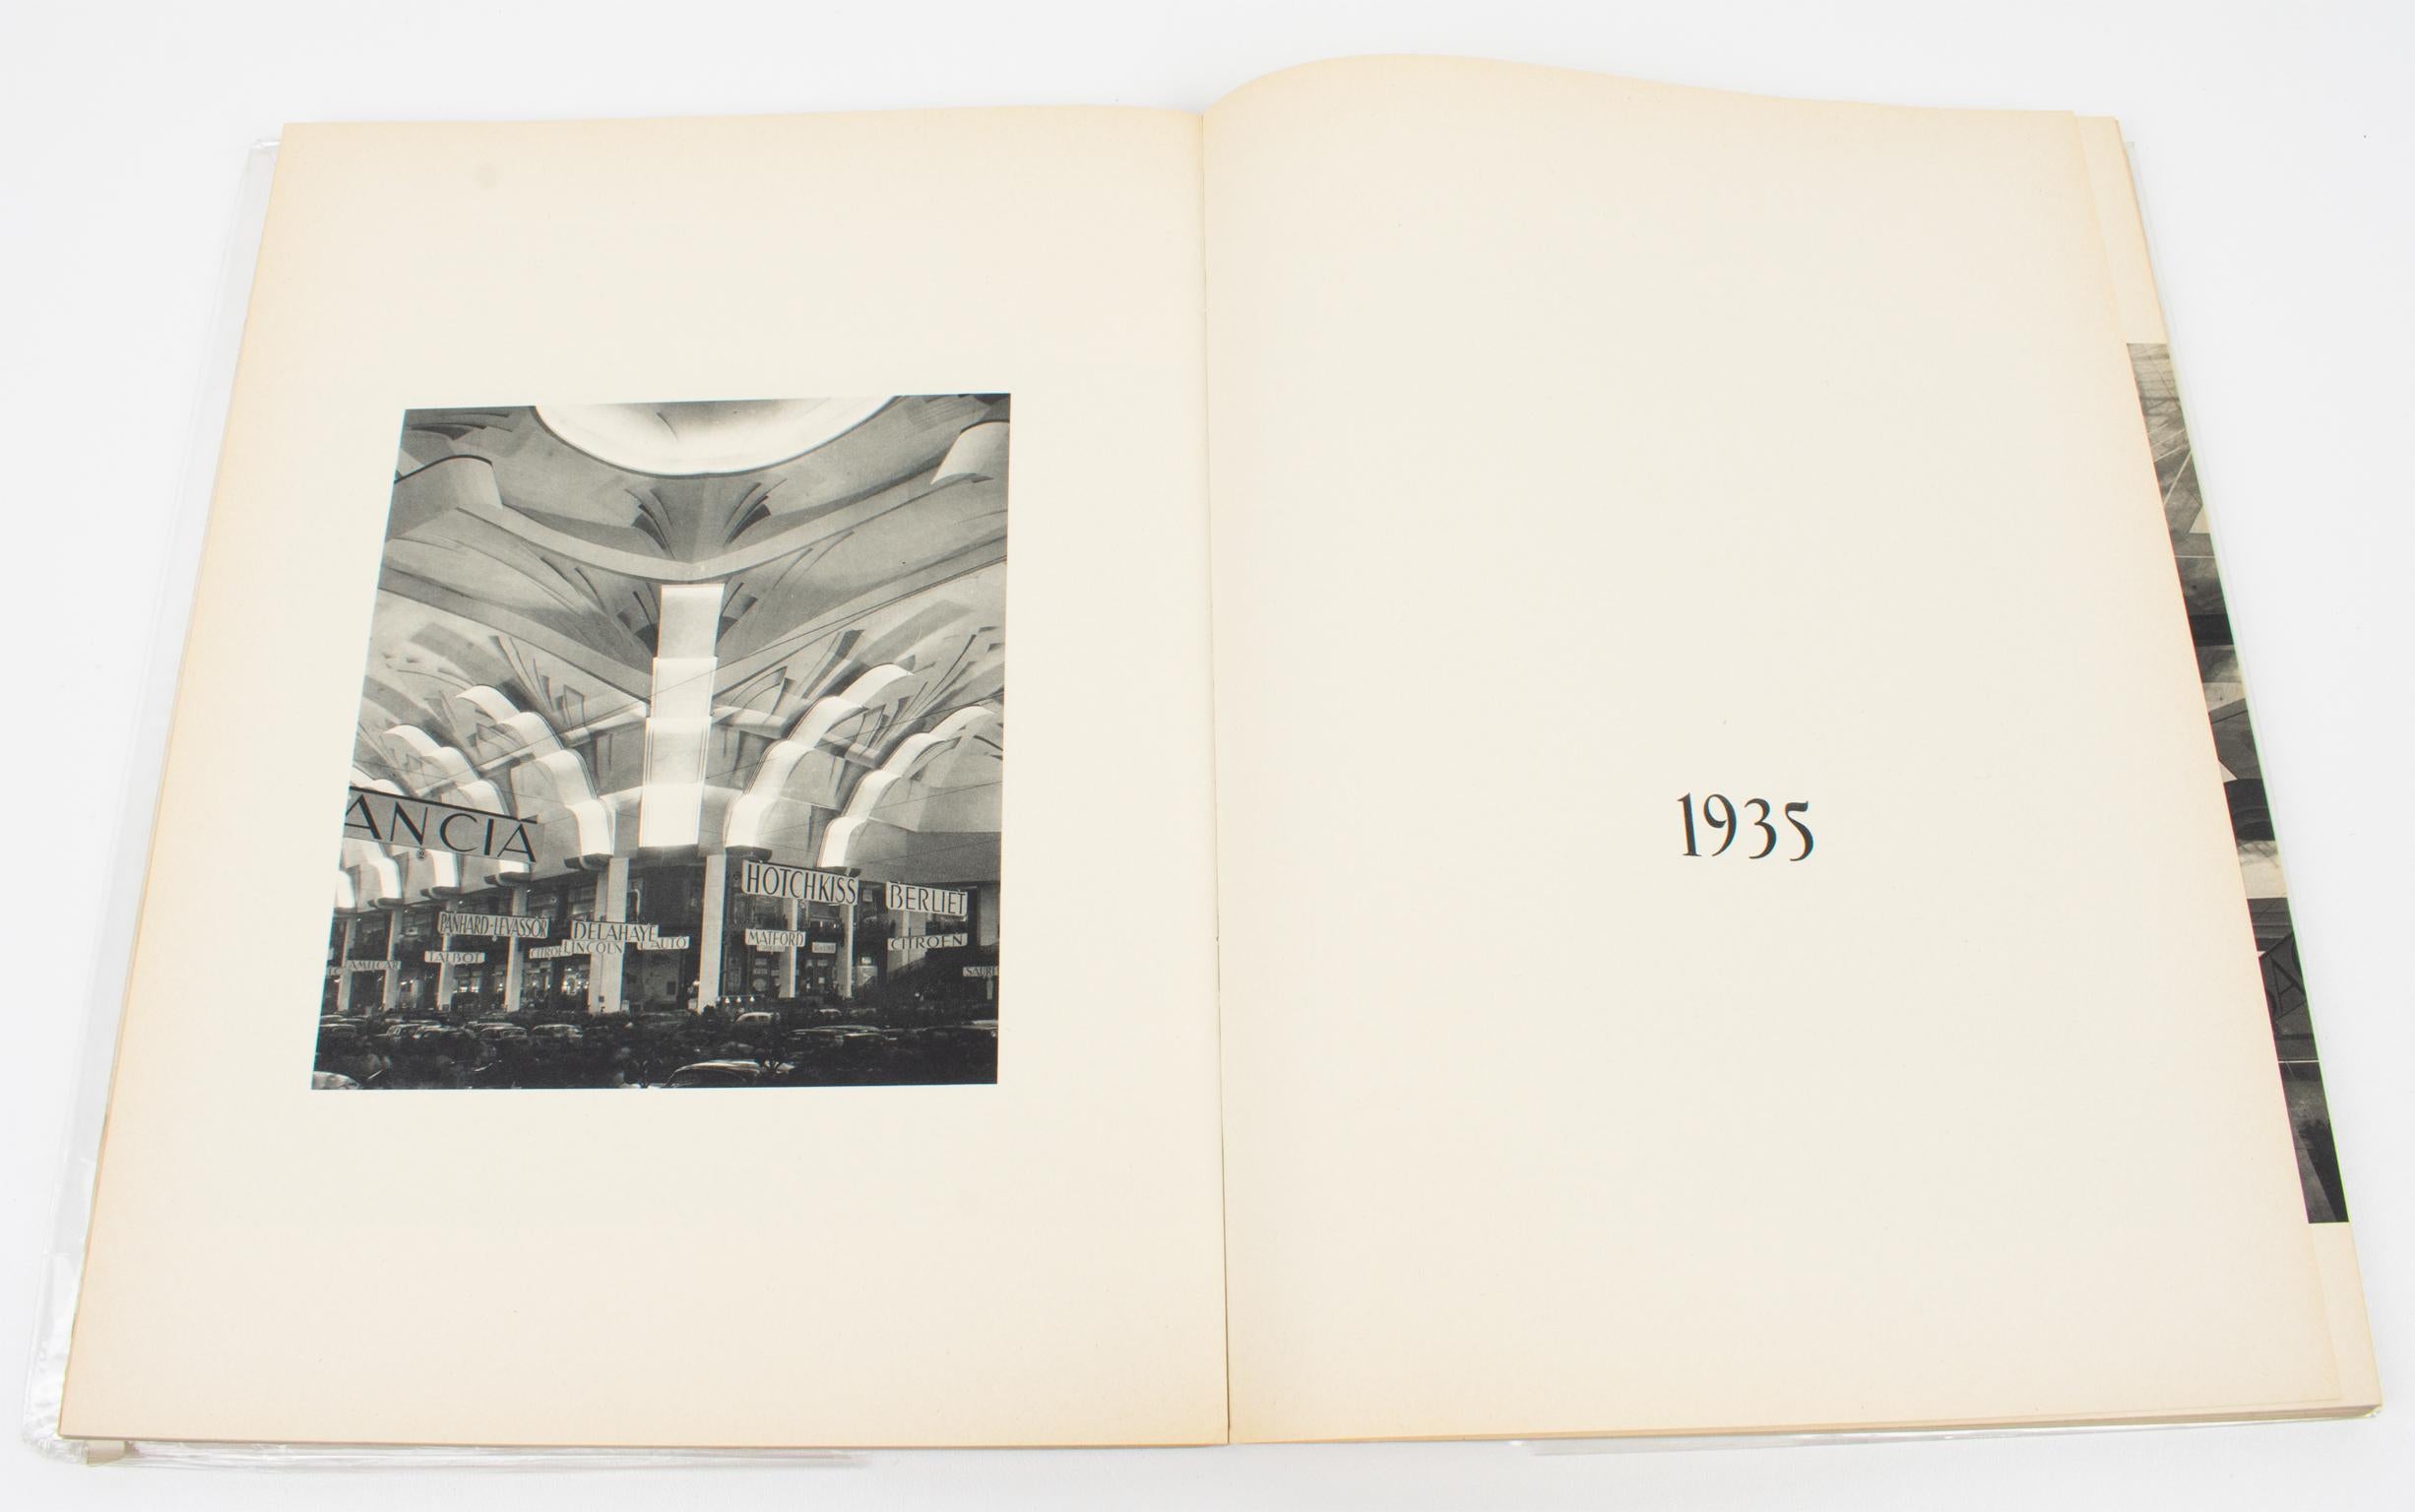 Paris Ephemeral Decorations, French Book by André Granet, Original 1948 Edition For Sale 1